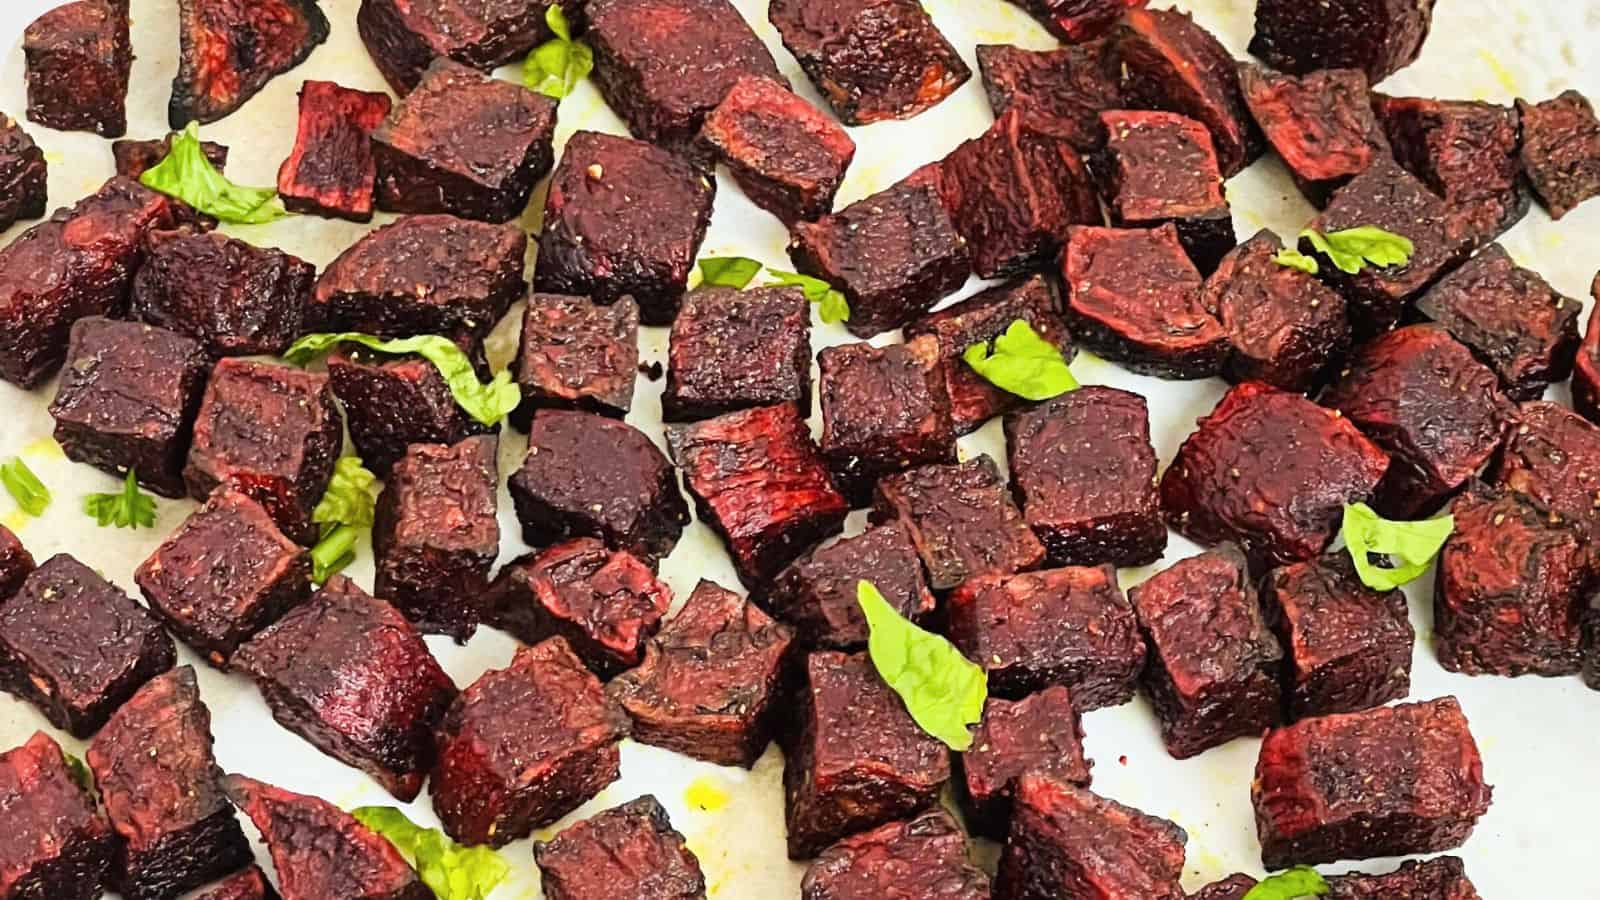 Diced roasted beetroot pieces scattered on a white plate, garnished with green herbs.